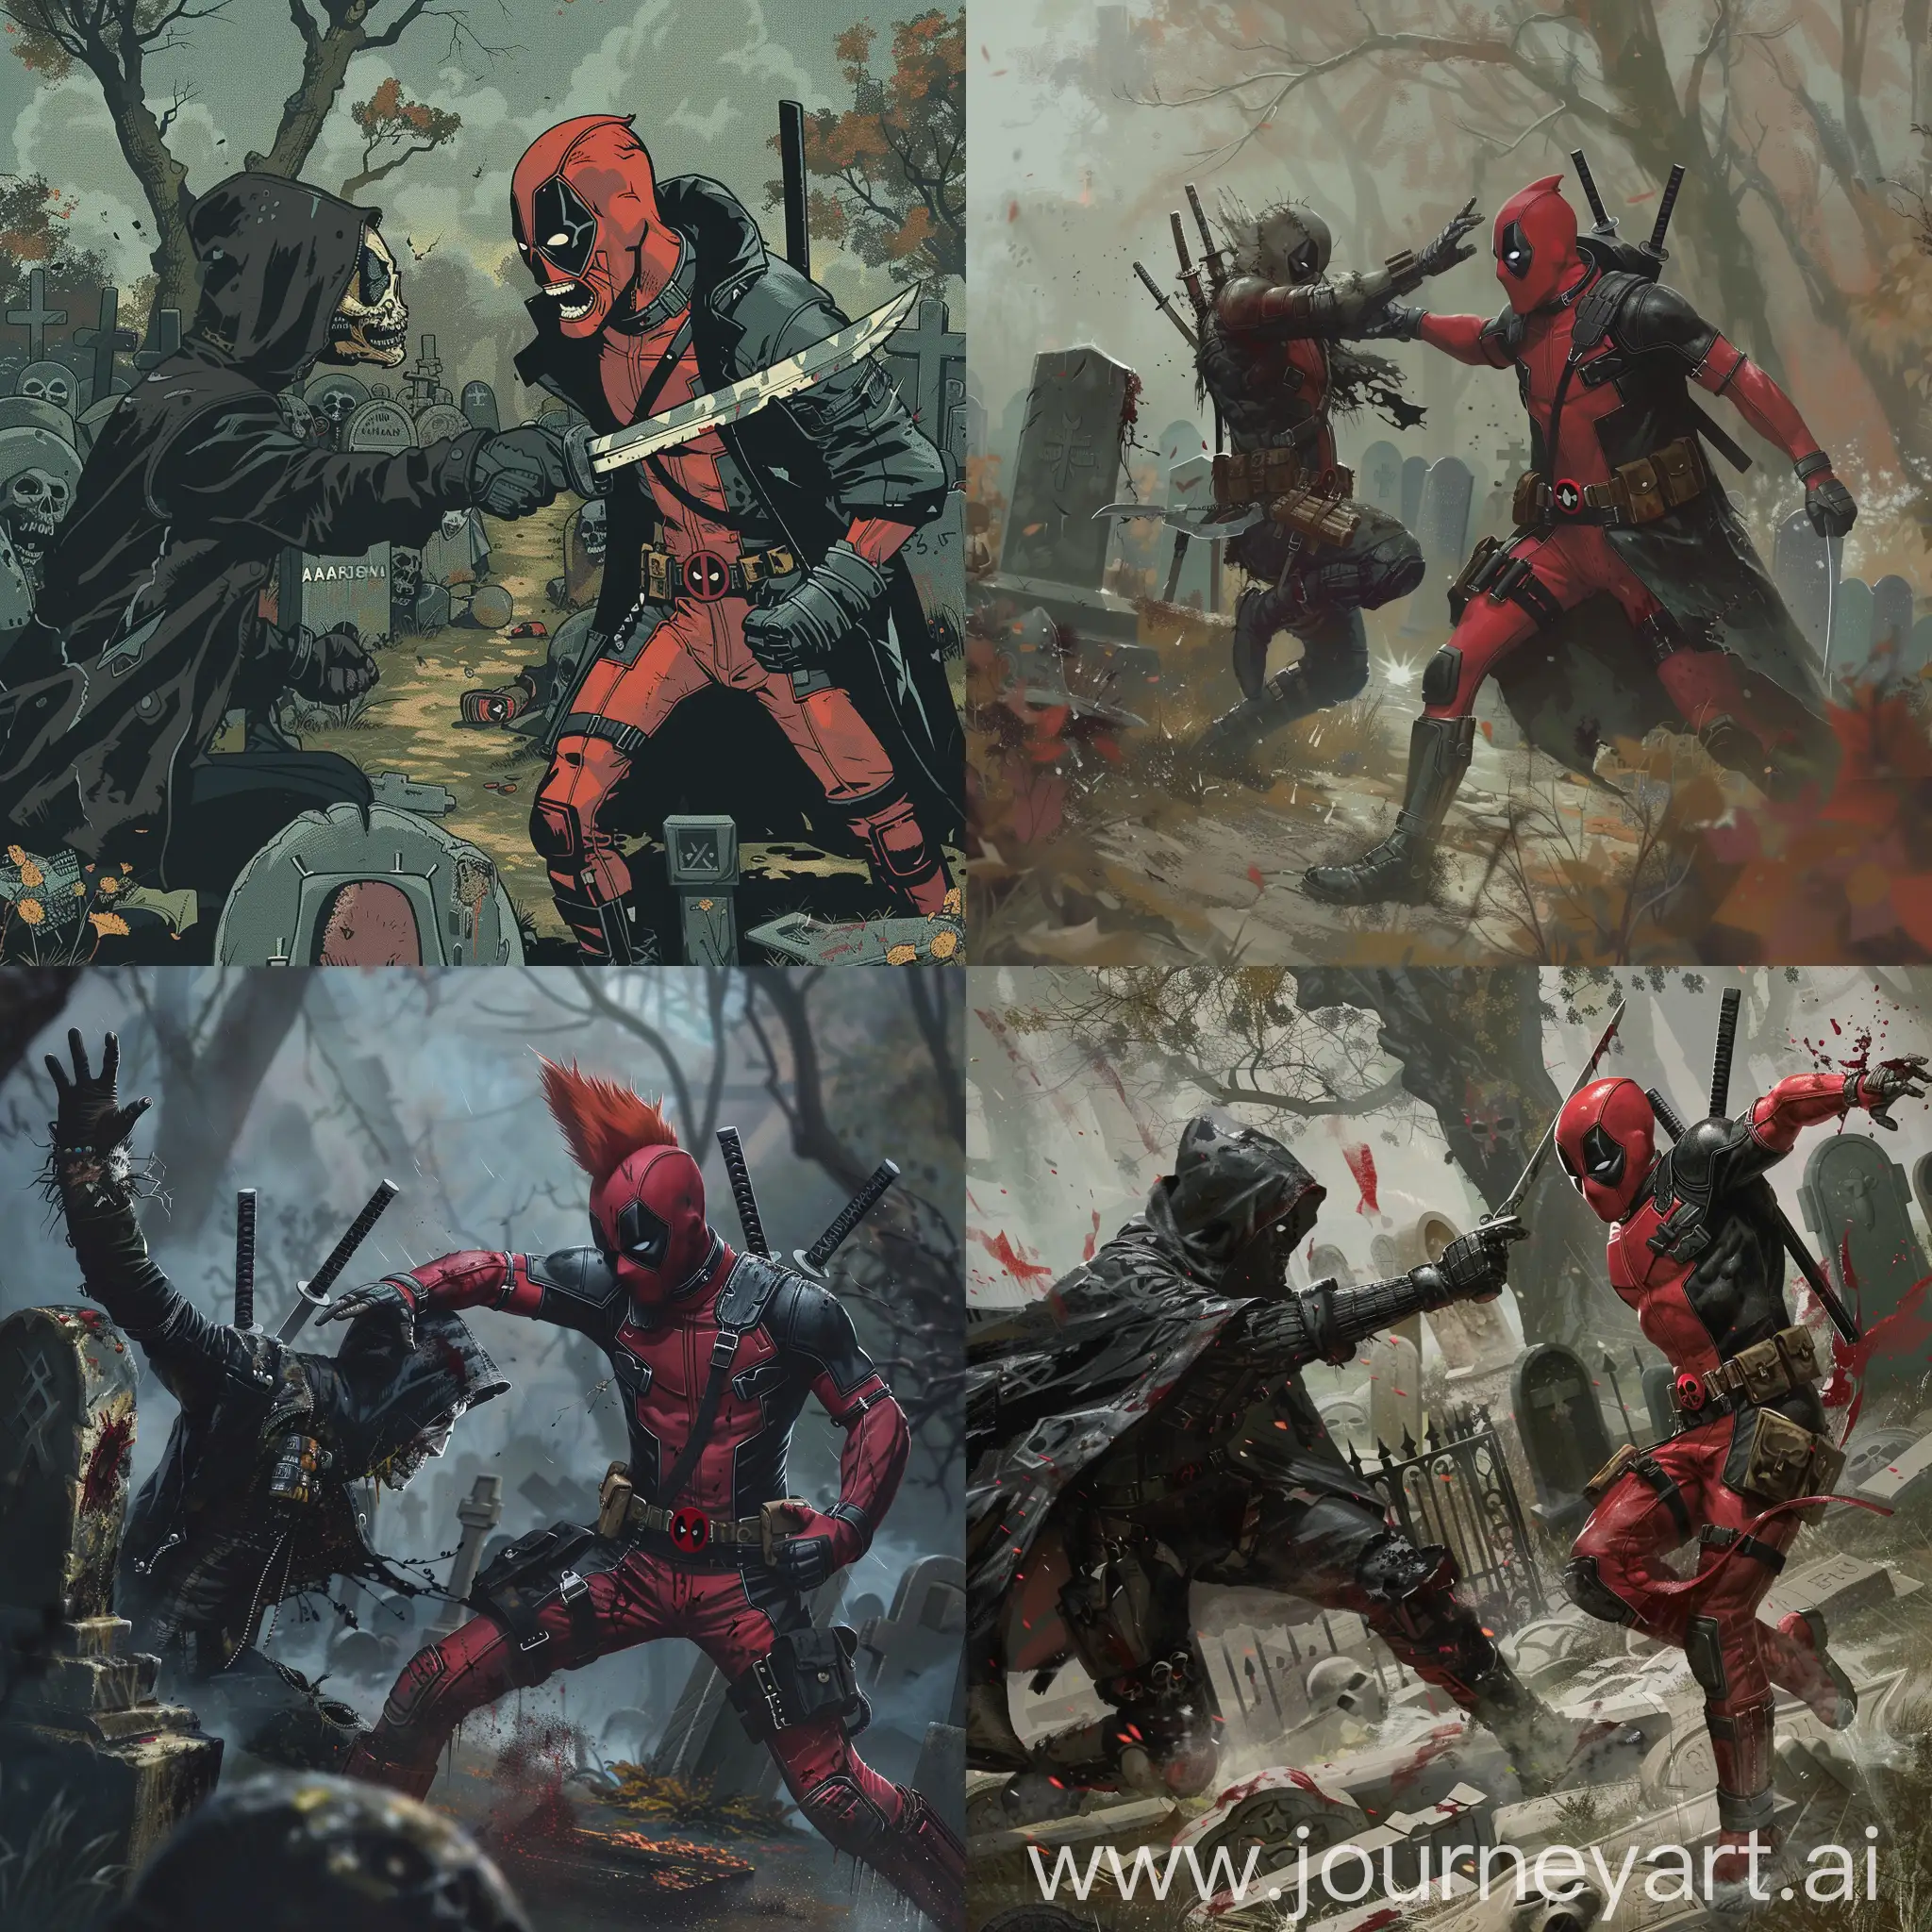 A dead punk anarchist in a black raincoat fights with deadpool among the graves